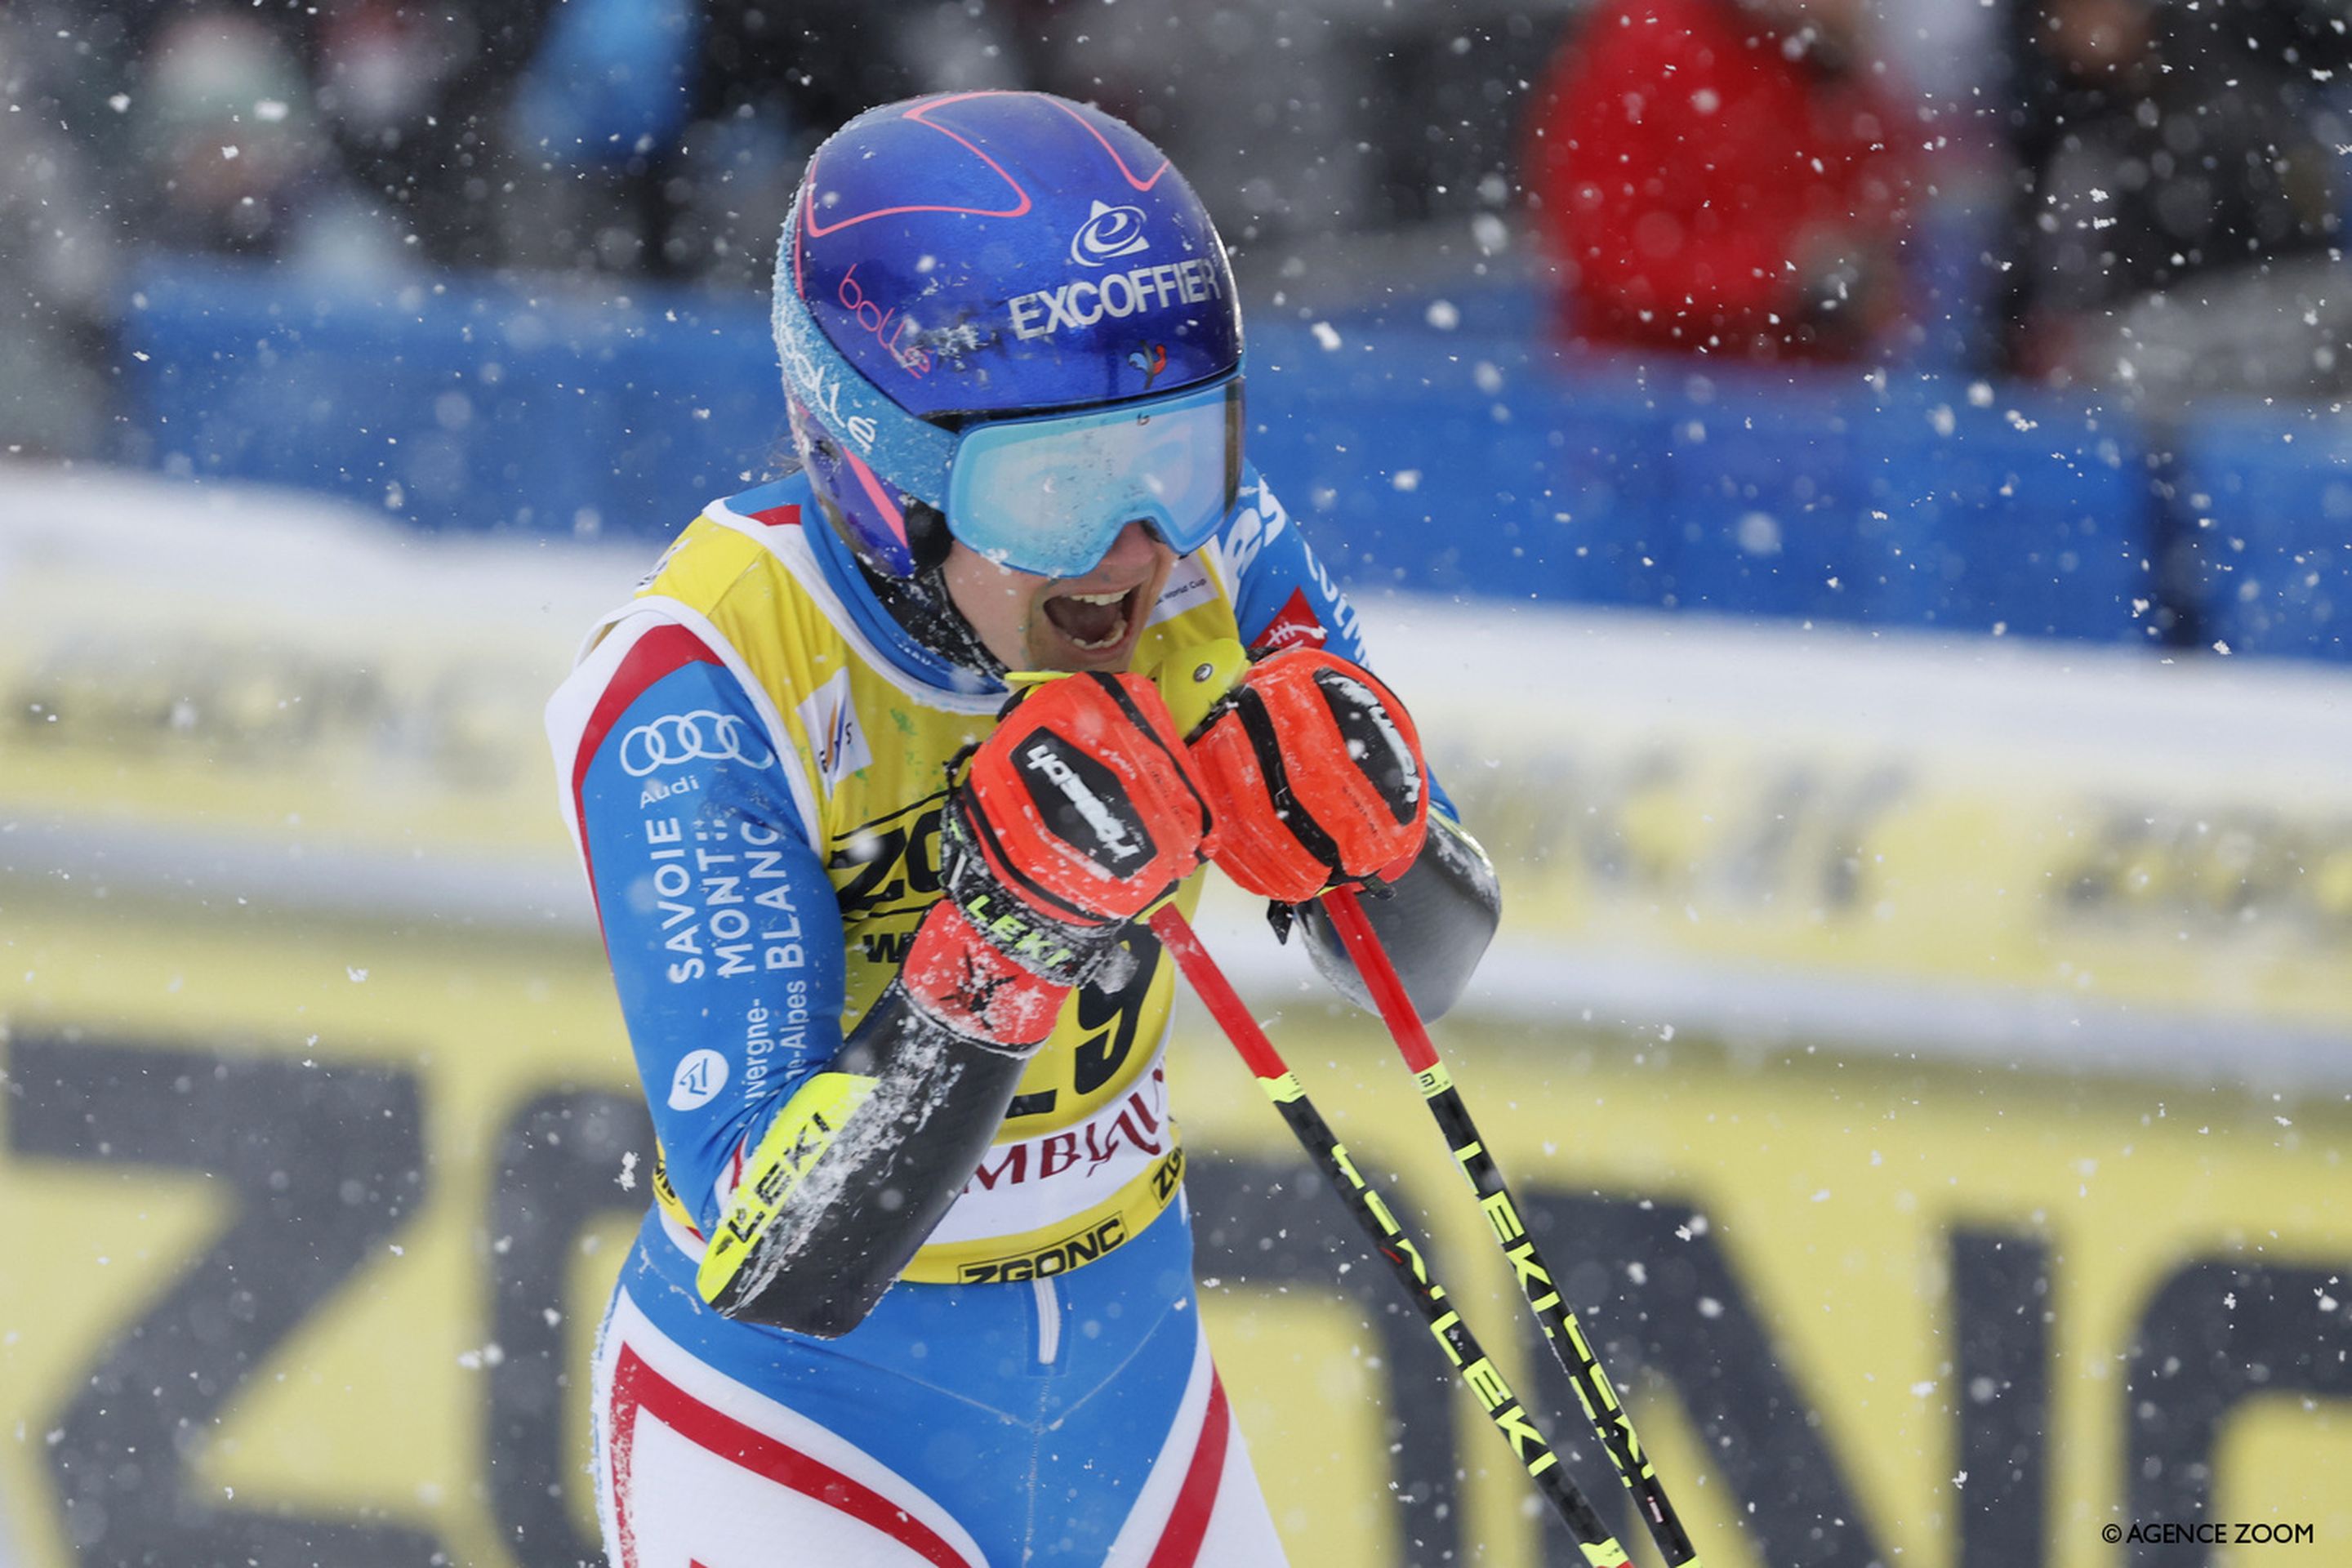 Clara Direz (FRA) came fourth to record the best giant slalom result of her career